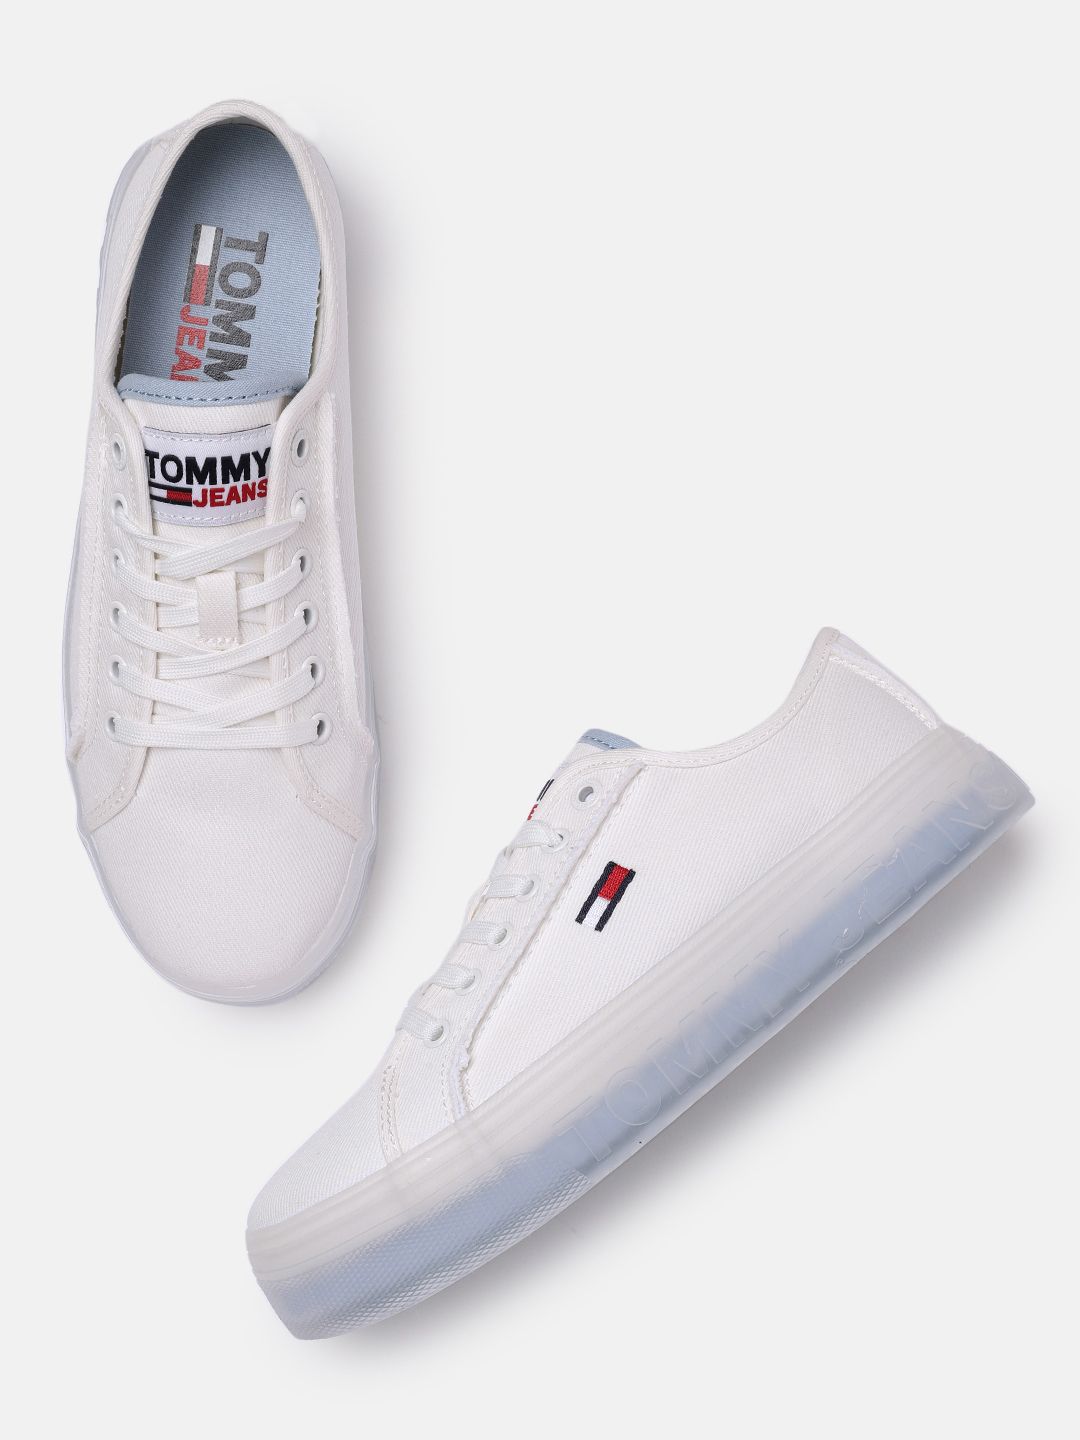 Tommy Hilfiger Women Solid White Sneakers Price in India